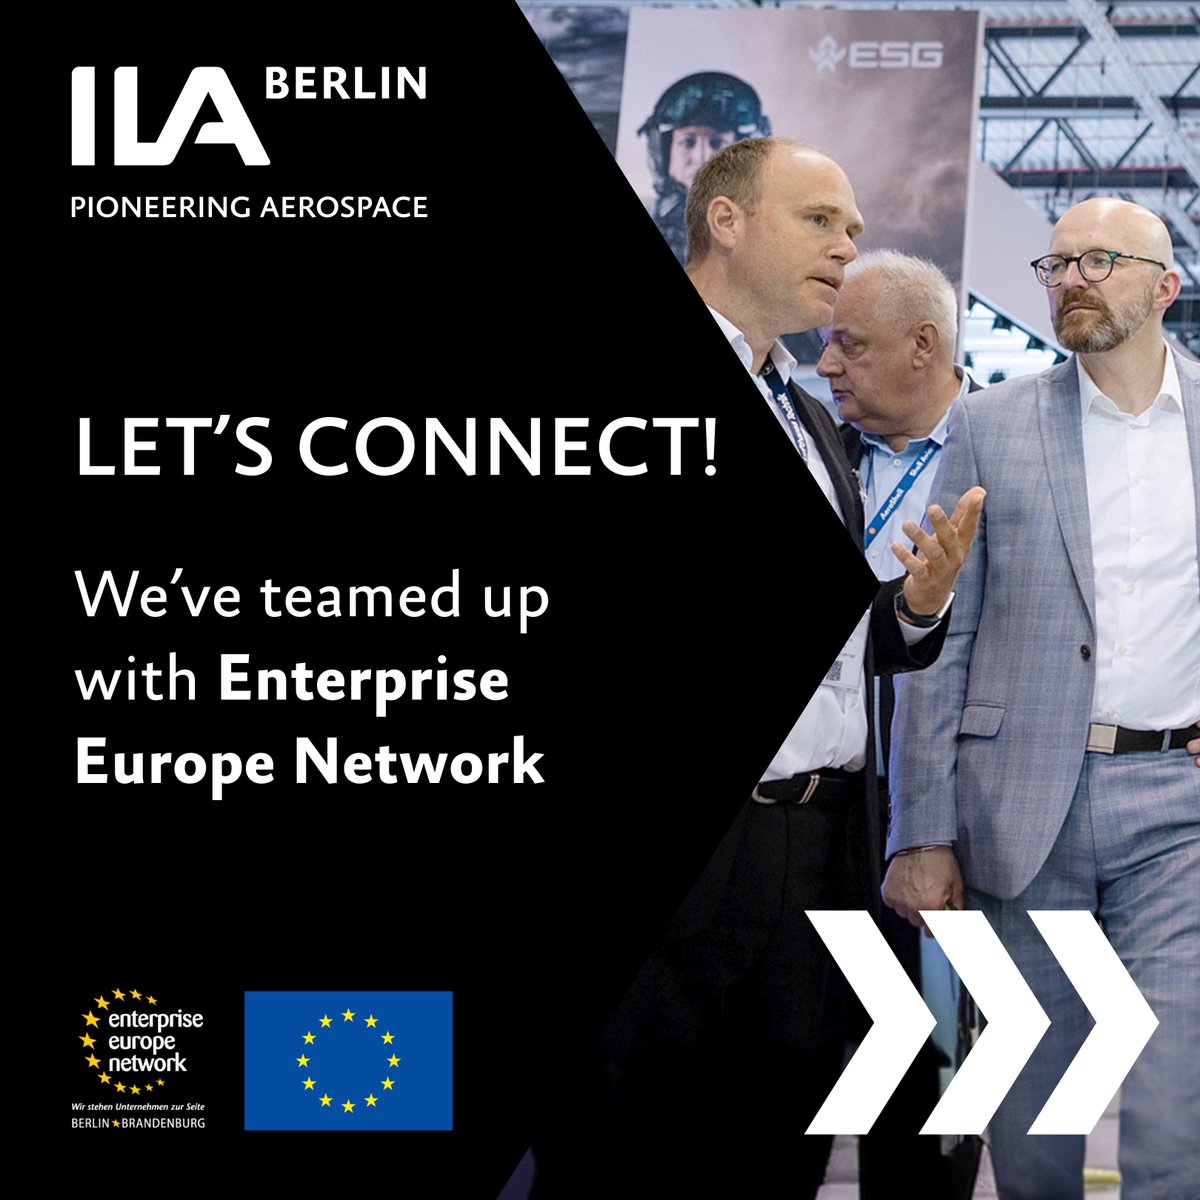 #ILA24 is growing! Thrilled to share that we’ve teamed up with Enterprise Europe Network @EEN_EU for our B2B matchmaking program ILA Connect & Meet. We'll help you navigate through the international business landscape. Want to know how it works? Check out b2match.io